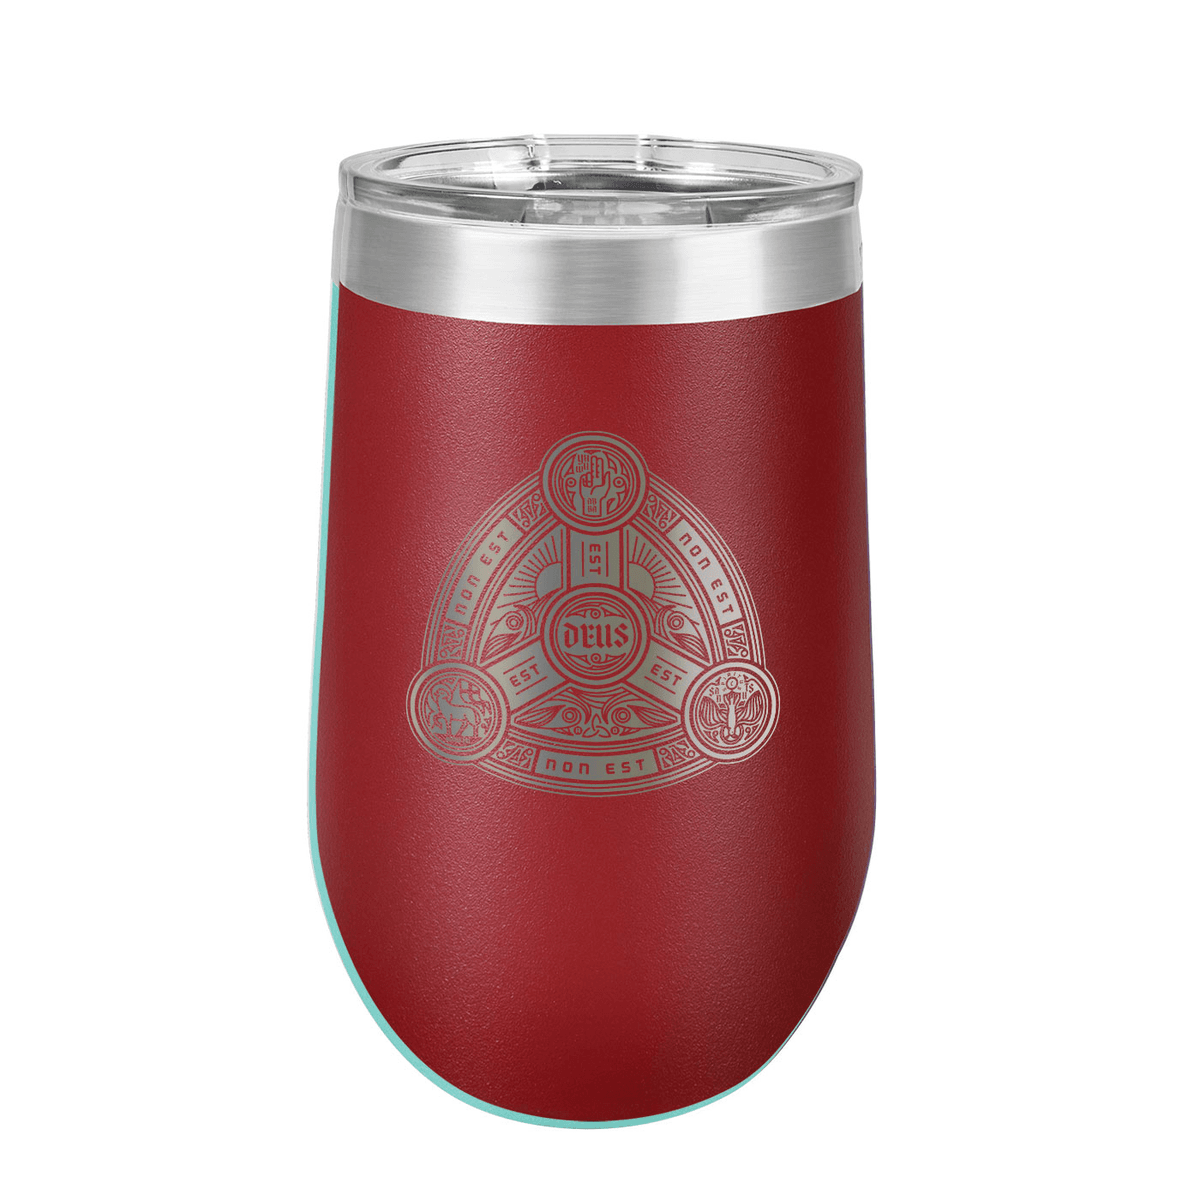 https://d11xh0uby8avni.cloudfront.net/fit-in/0x1200/products/VOTH01-tumbler16-maroon.png